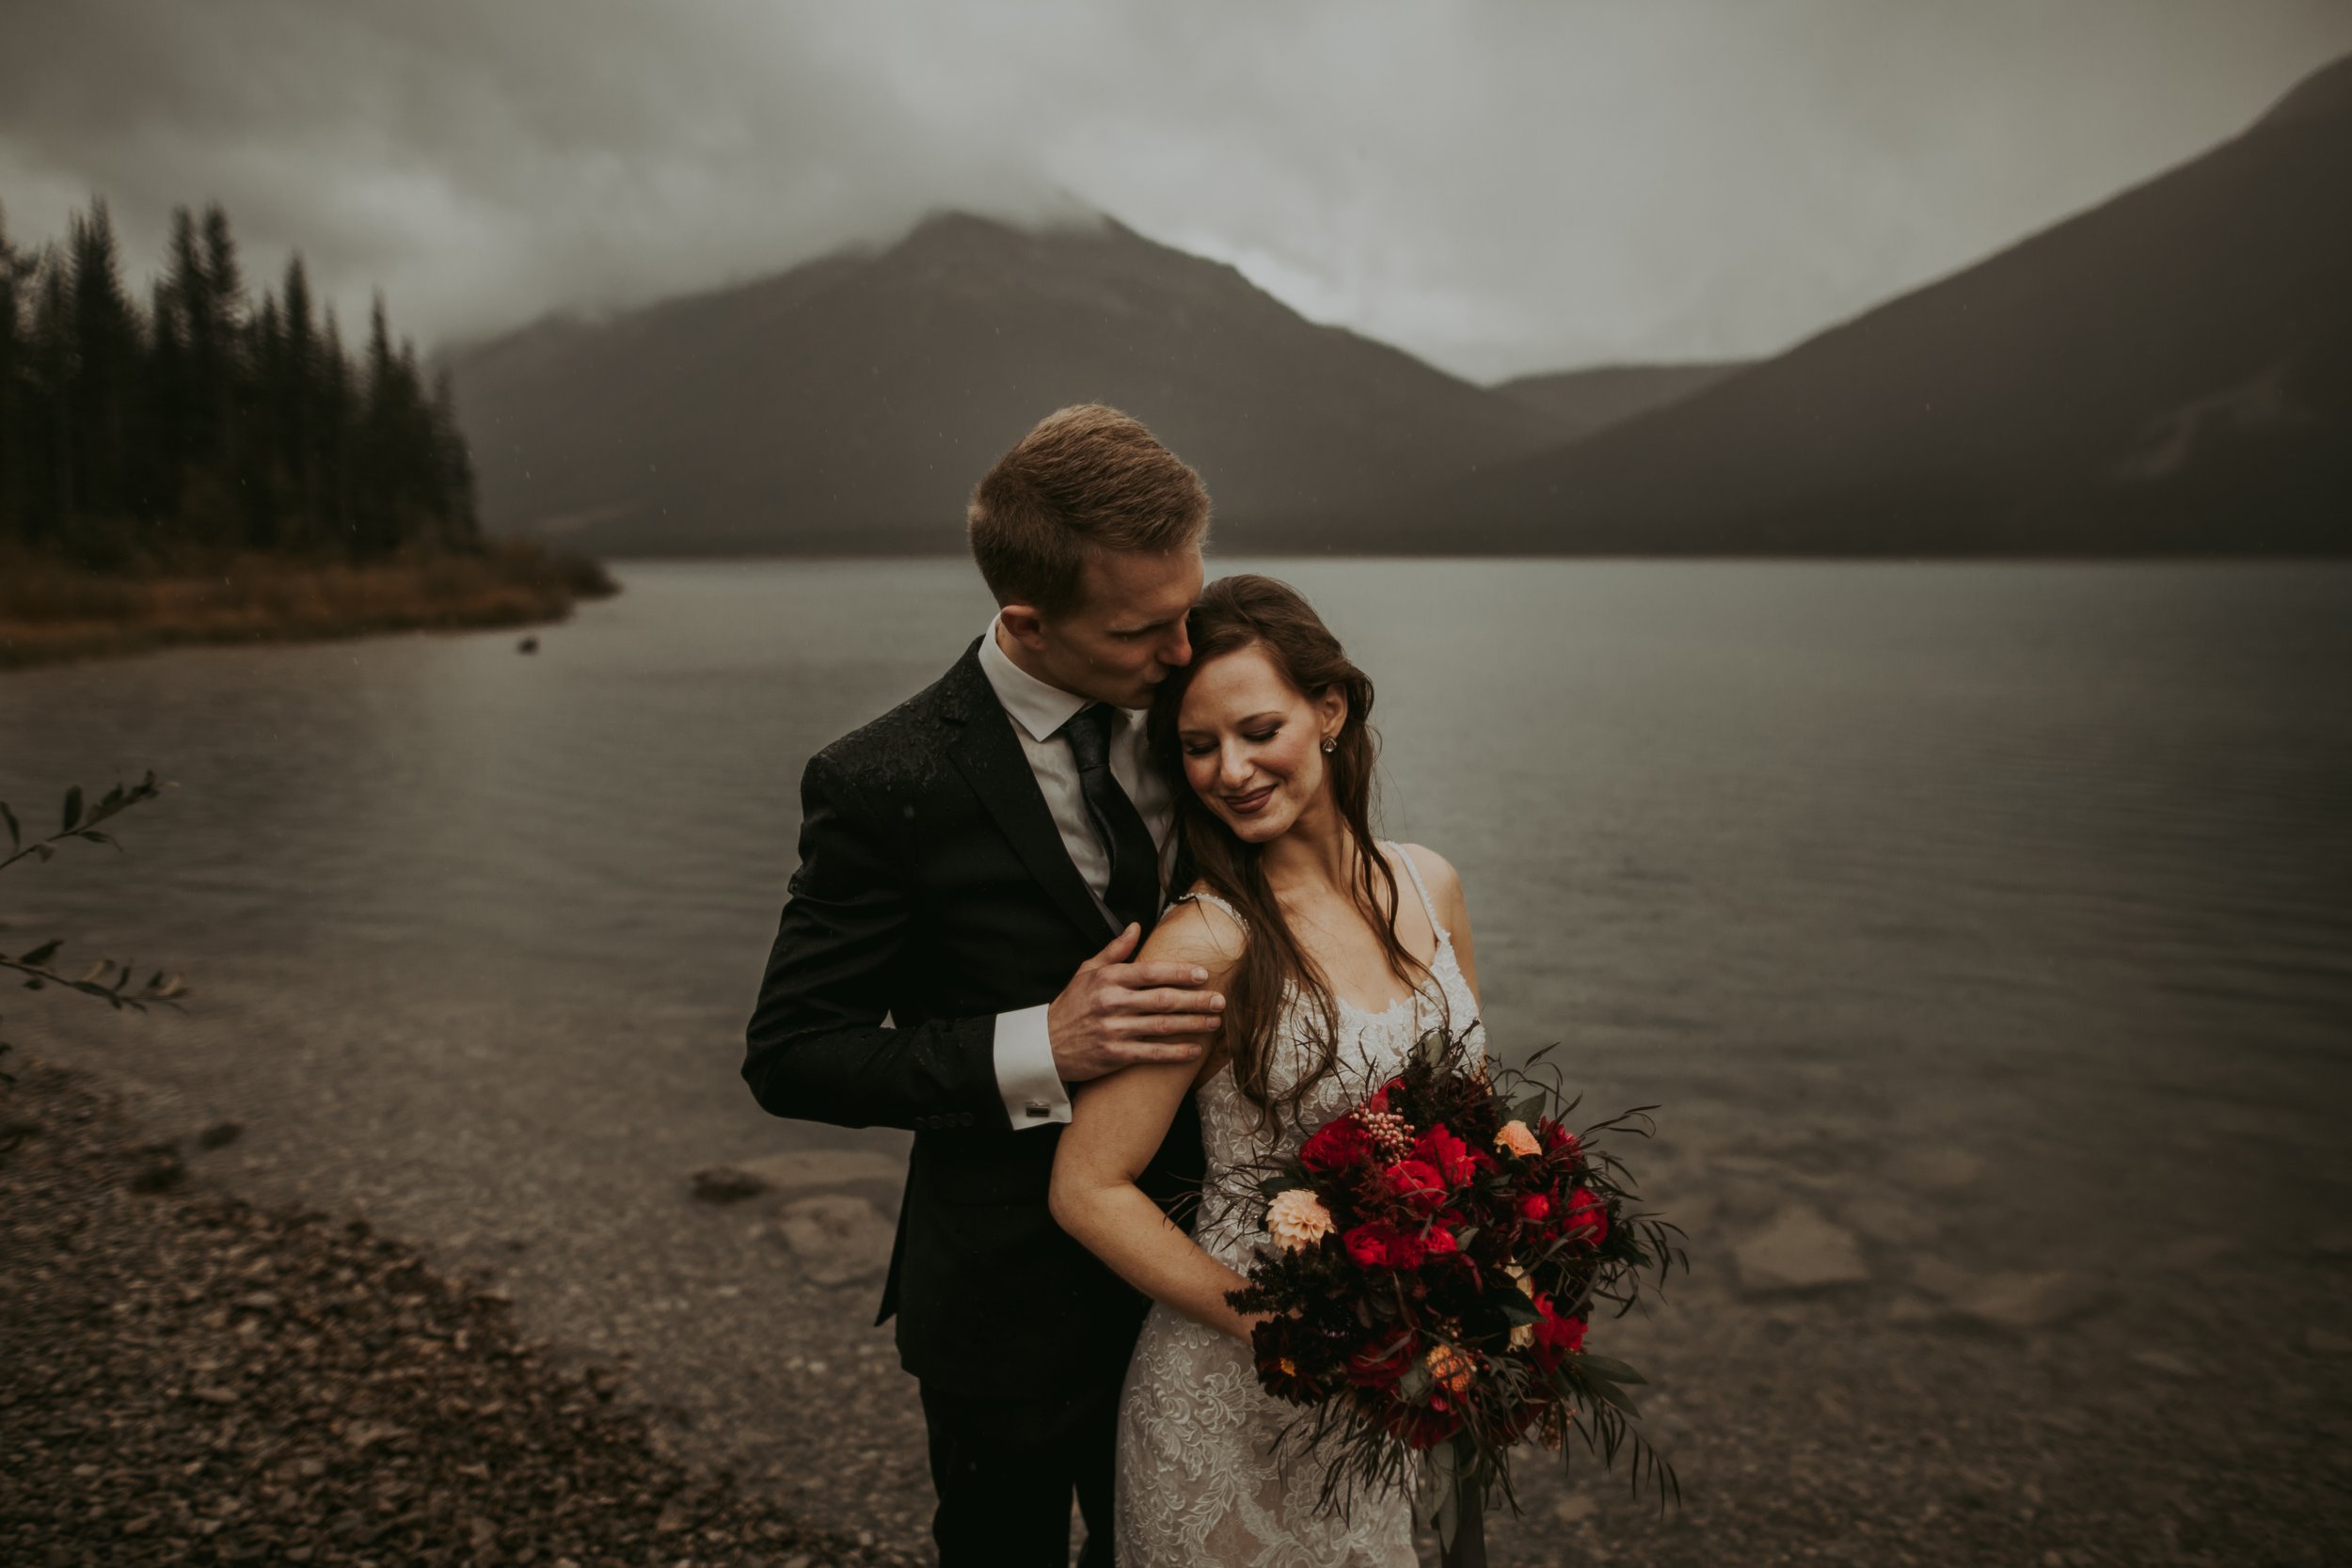 Intimate calgary Elopement, Intimate vancouver elopement